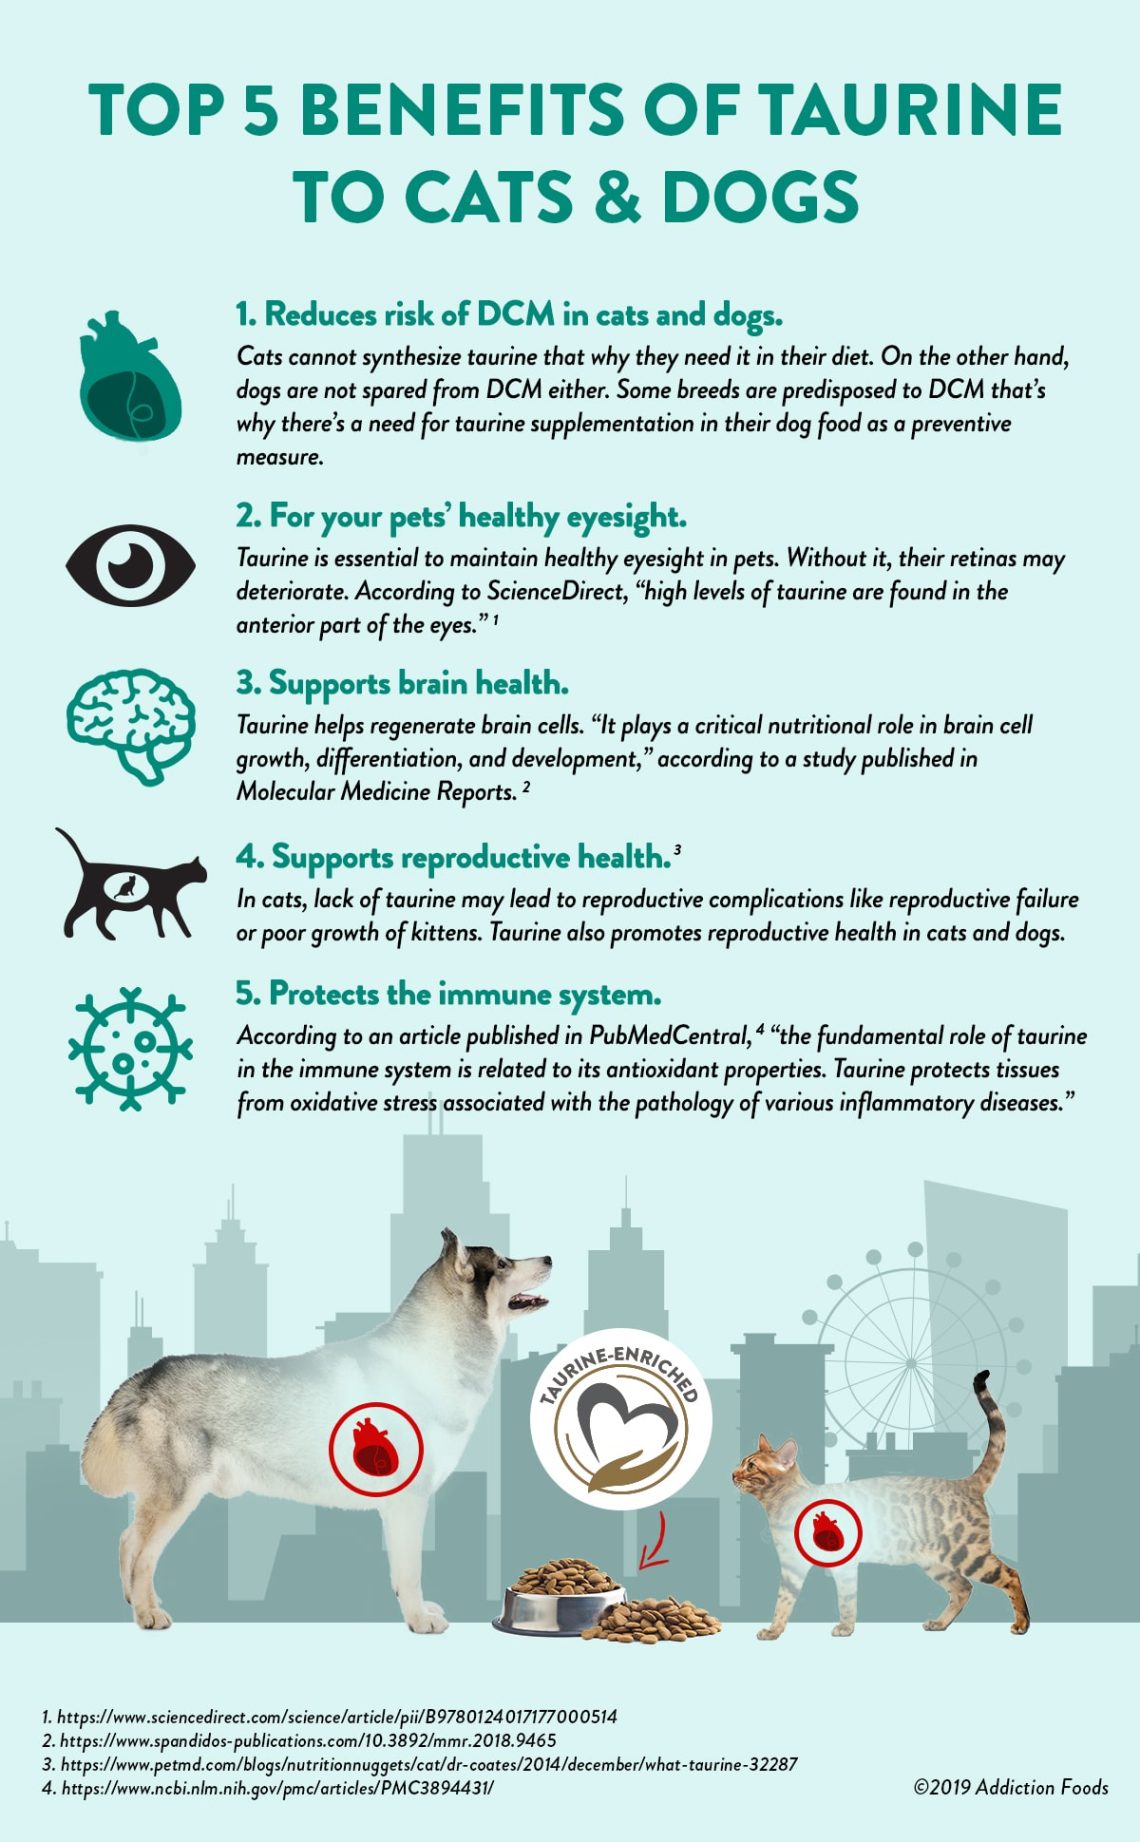 Benefits of Taurine for Cats